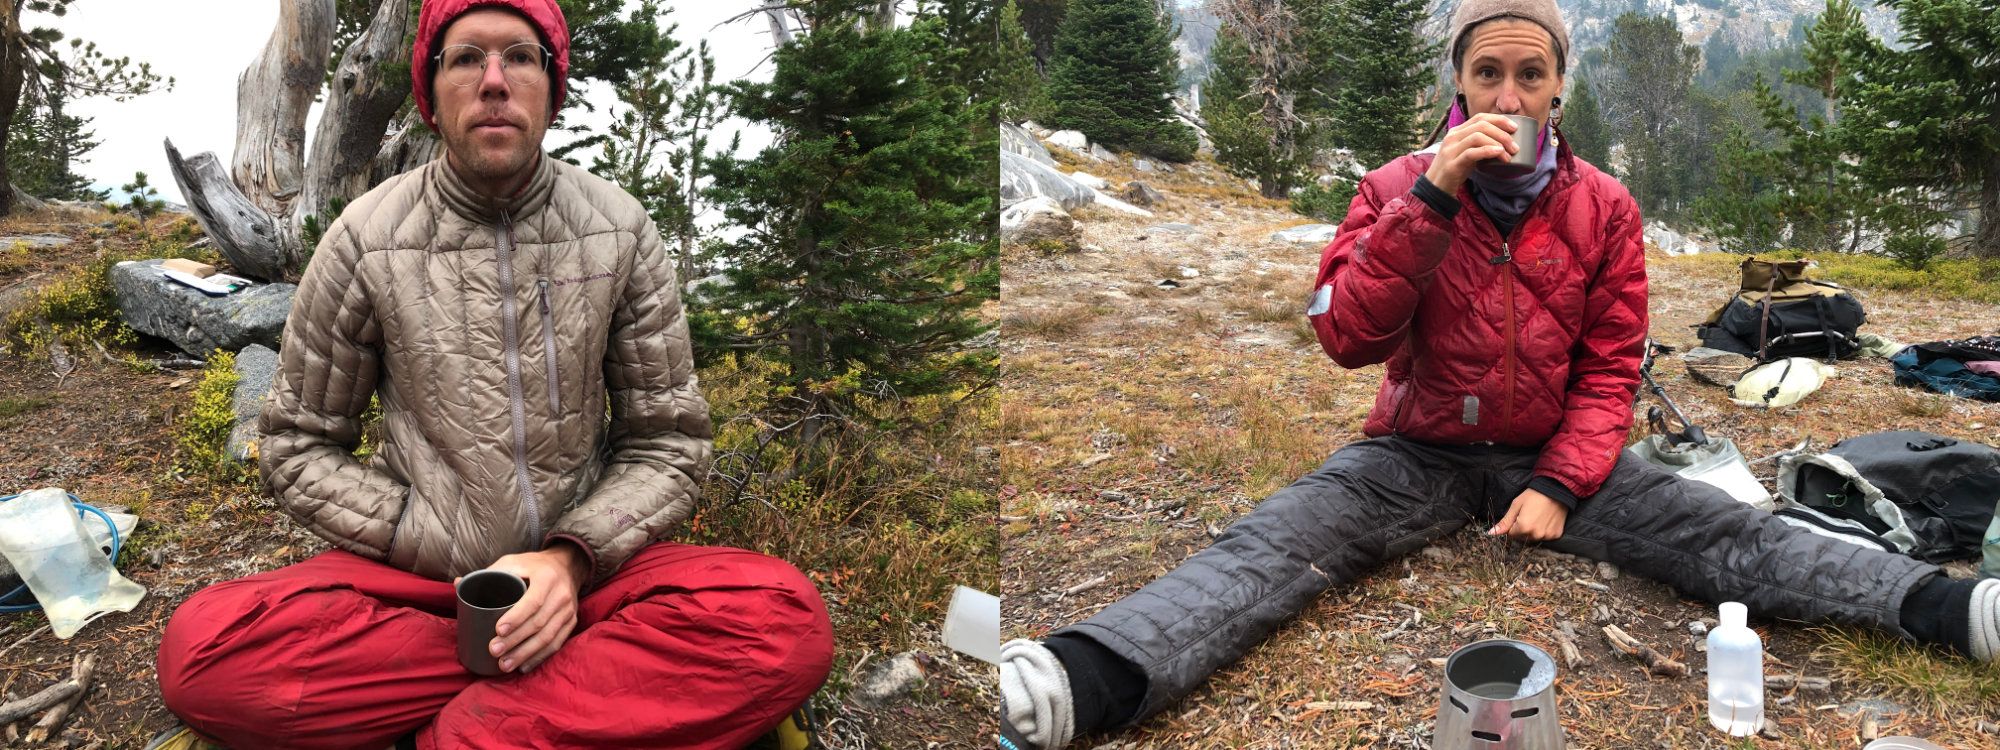 A man sits on the left a woman on the right wearing insulated outdoor clothing high up in the mountains.